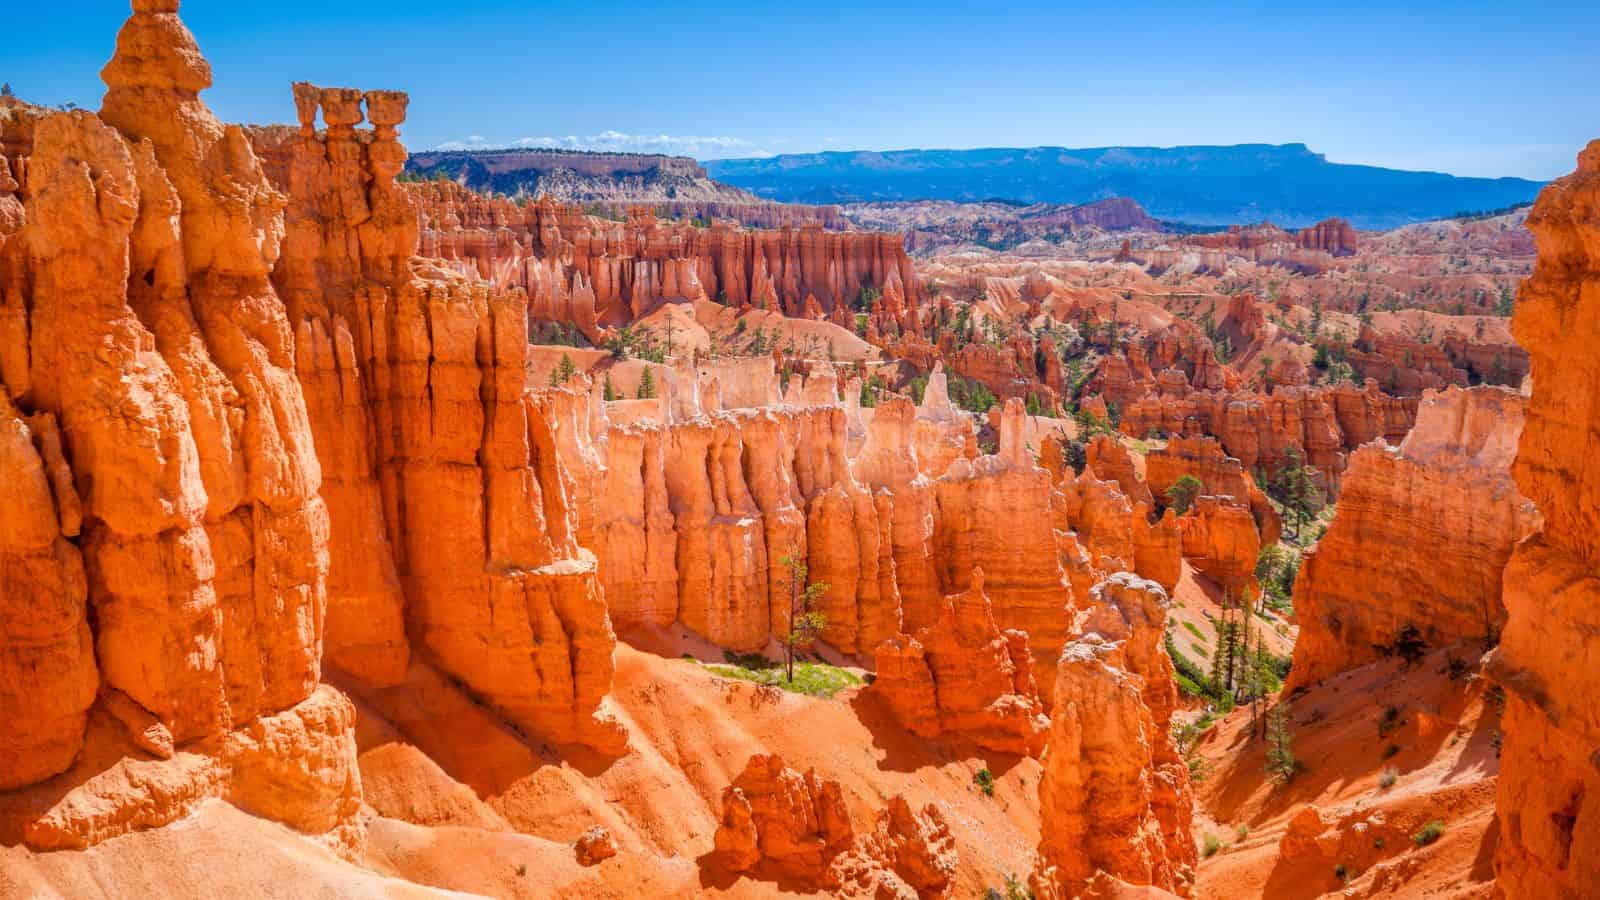 <p>Bryce Canyon National Park is known worldwide for its hoodoos, tall, thin spires of rock formed over centuries of erosion. Driving throughout the Bryce Canyon Scenic Drive offers visitors breathtaking views of the red, orange, and white maze-like hoodoos.</p>